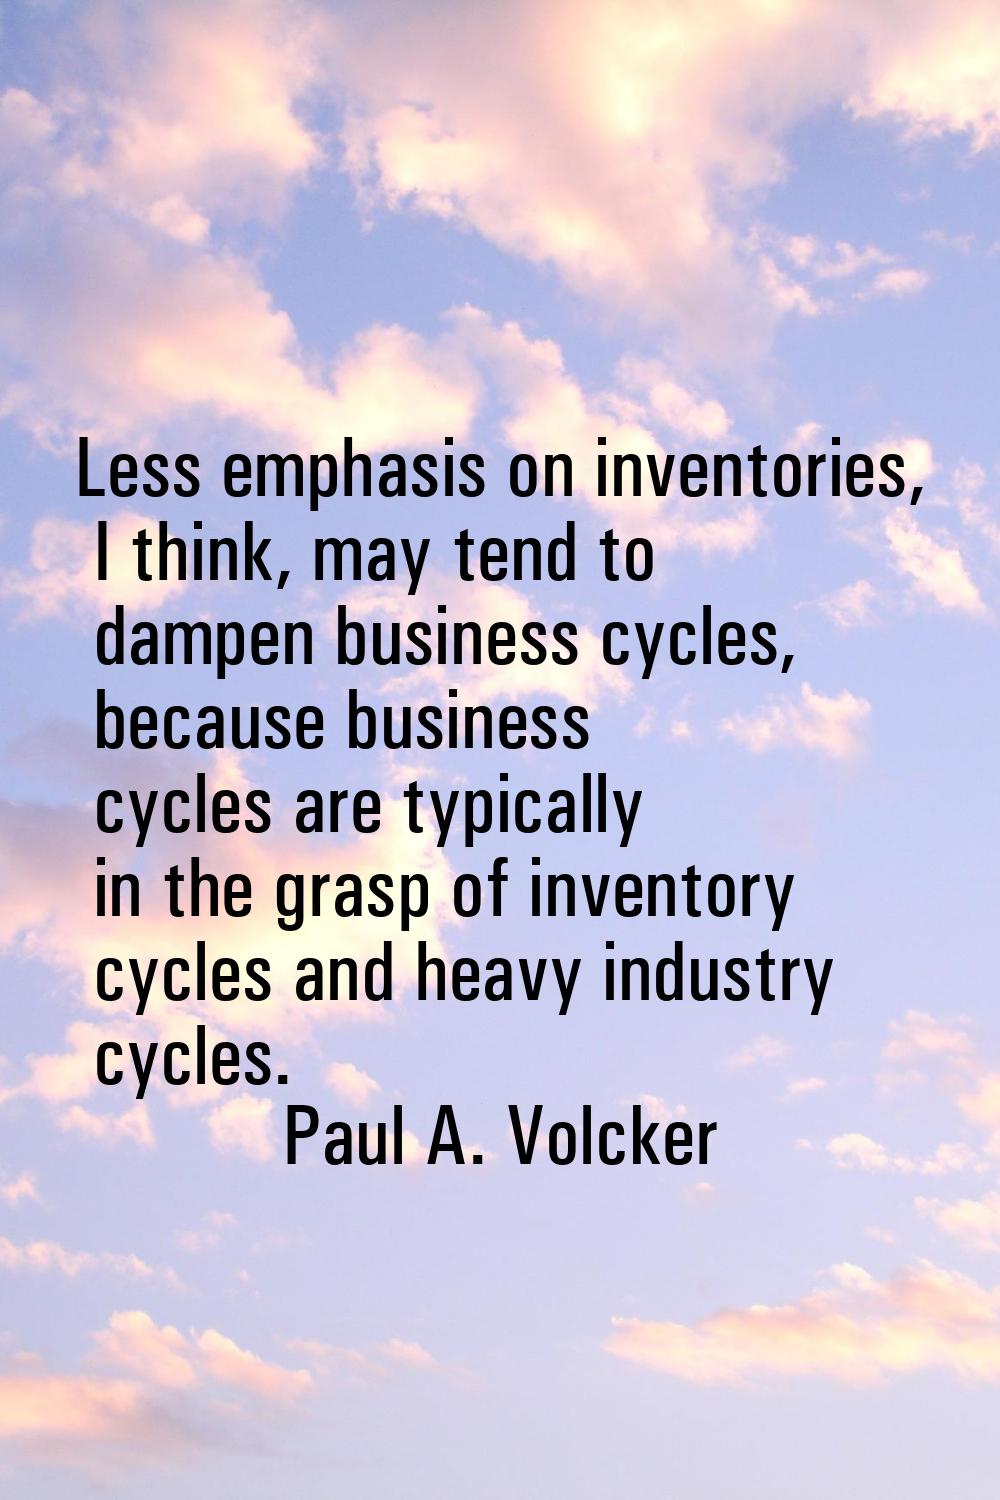 Less emphasis on inventories, I think, may tend to dampen business cycles, because business cycles 